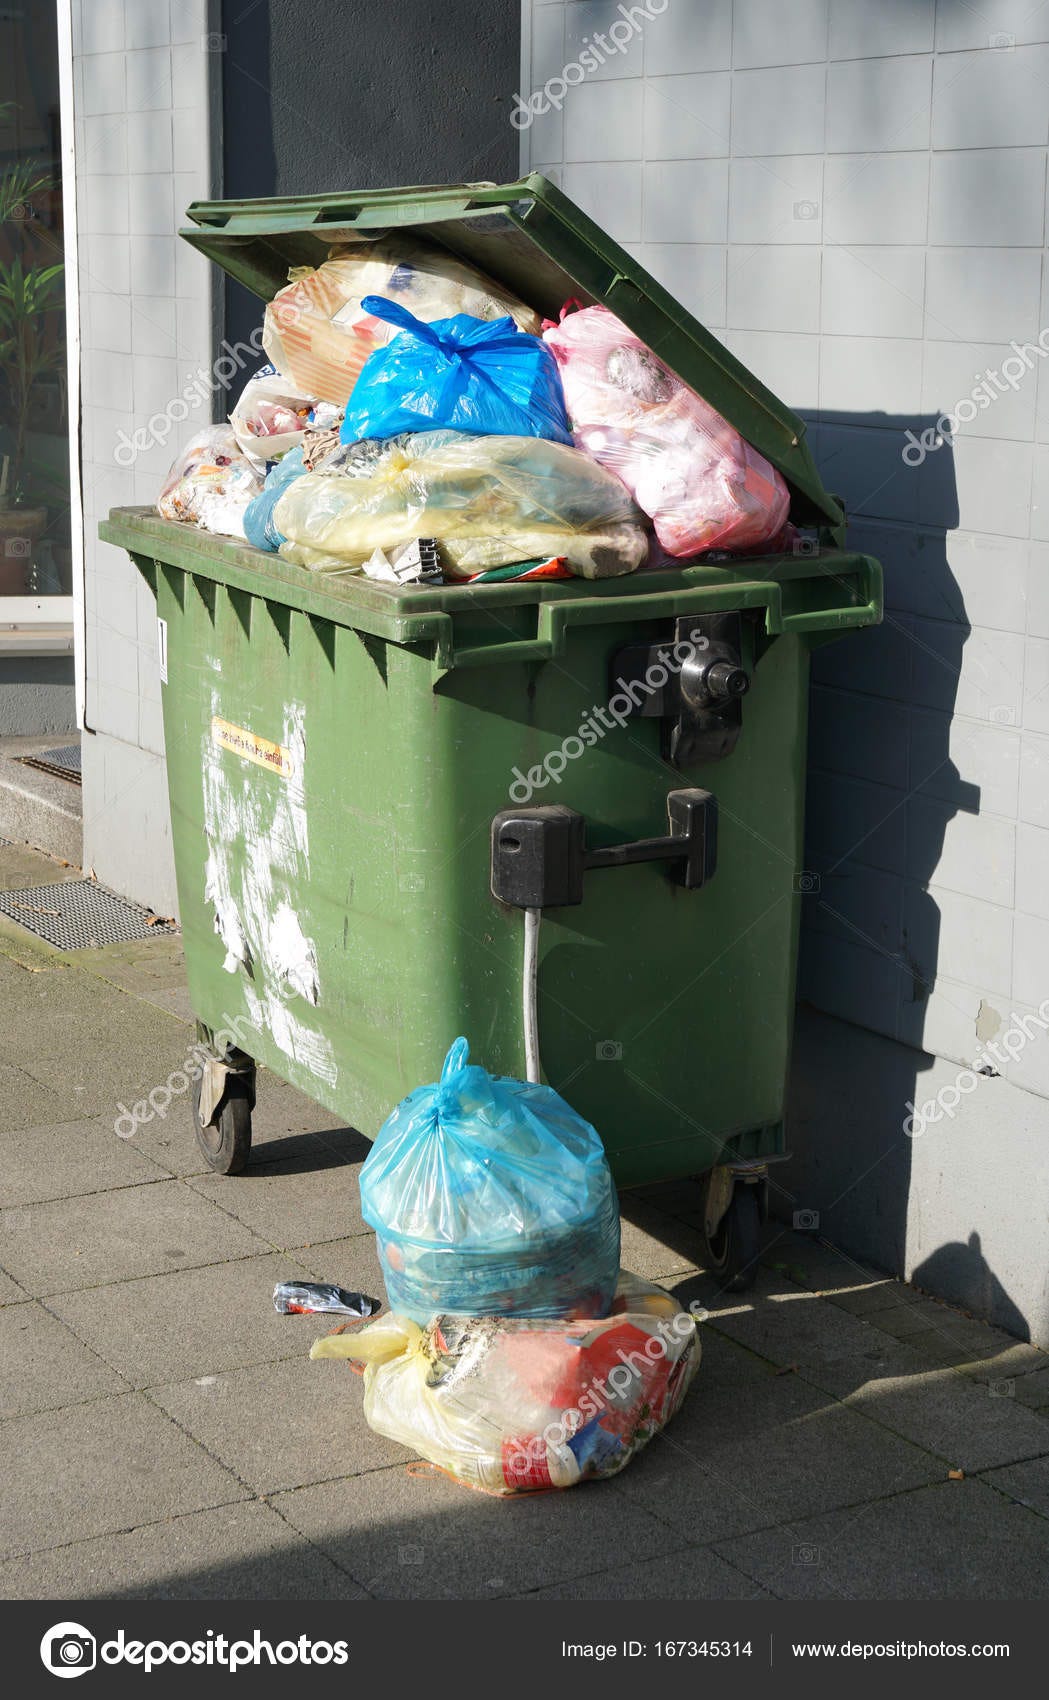 Overflowing trash can Stock Photos, Royalty Free Overflowing trash can  Images | Depositphotos